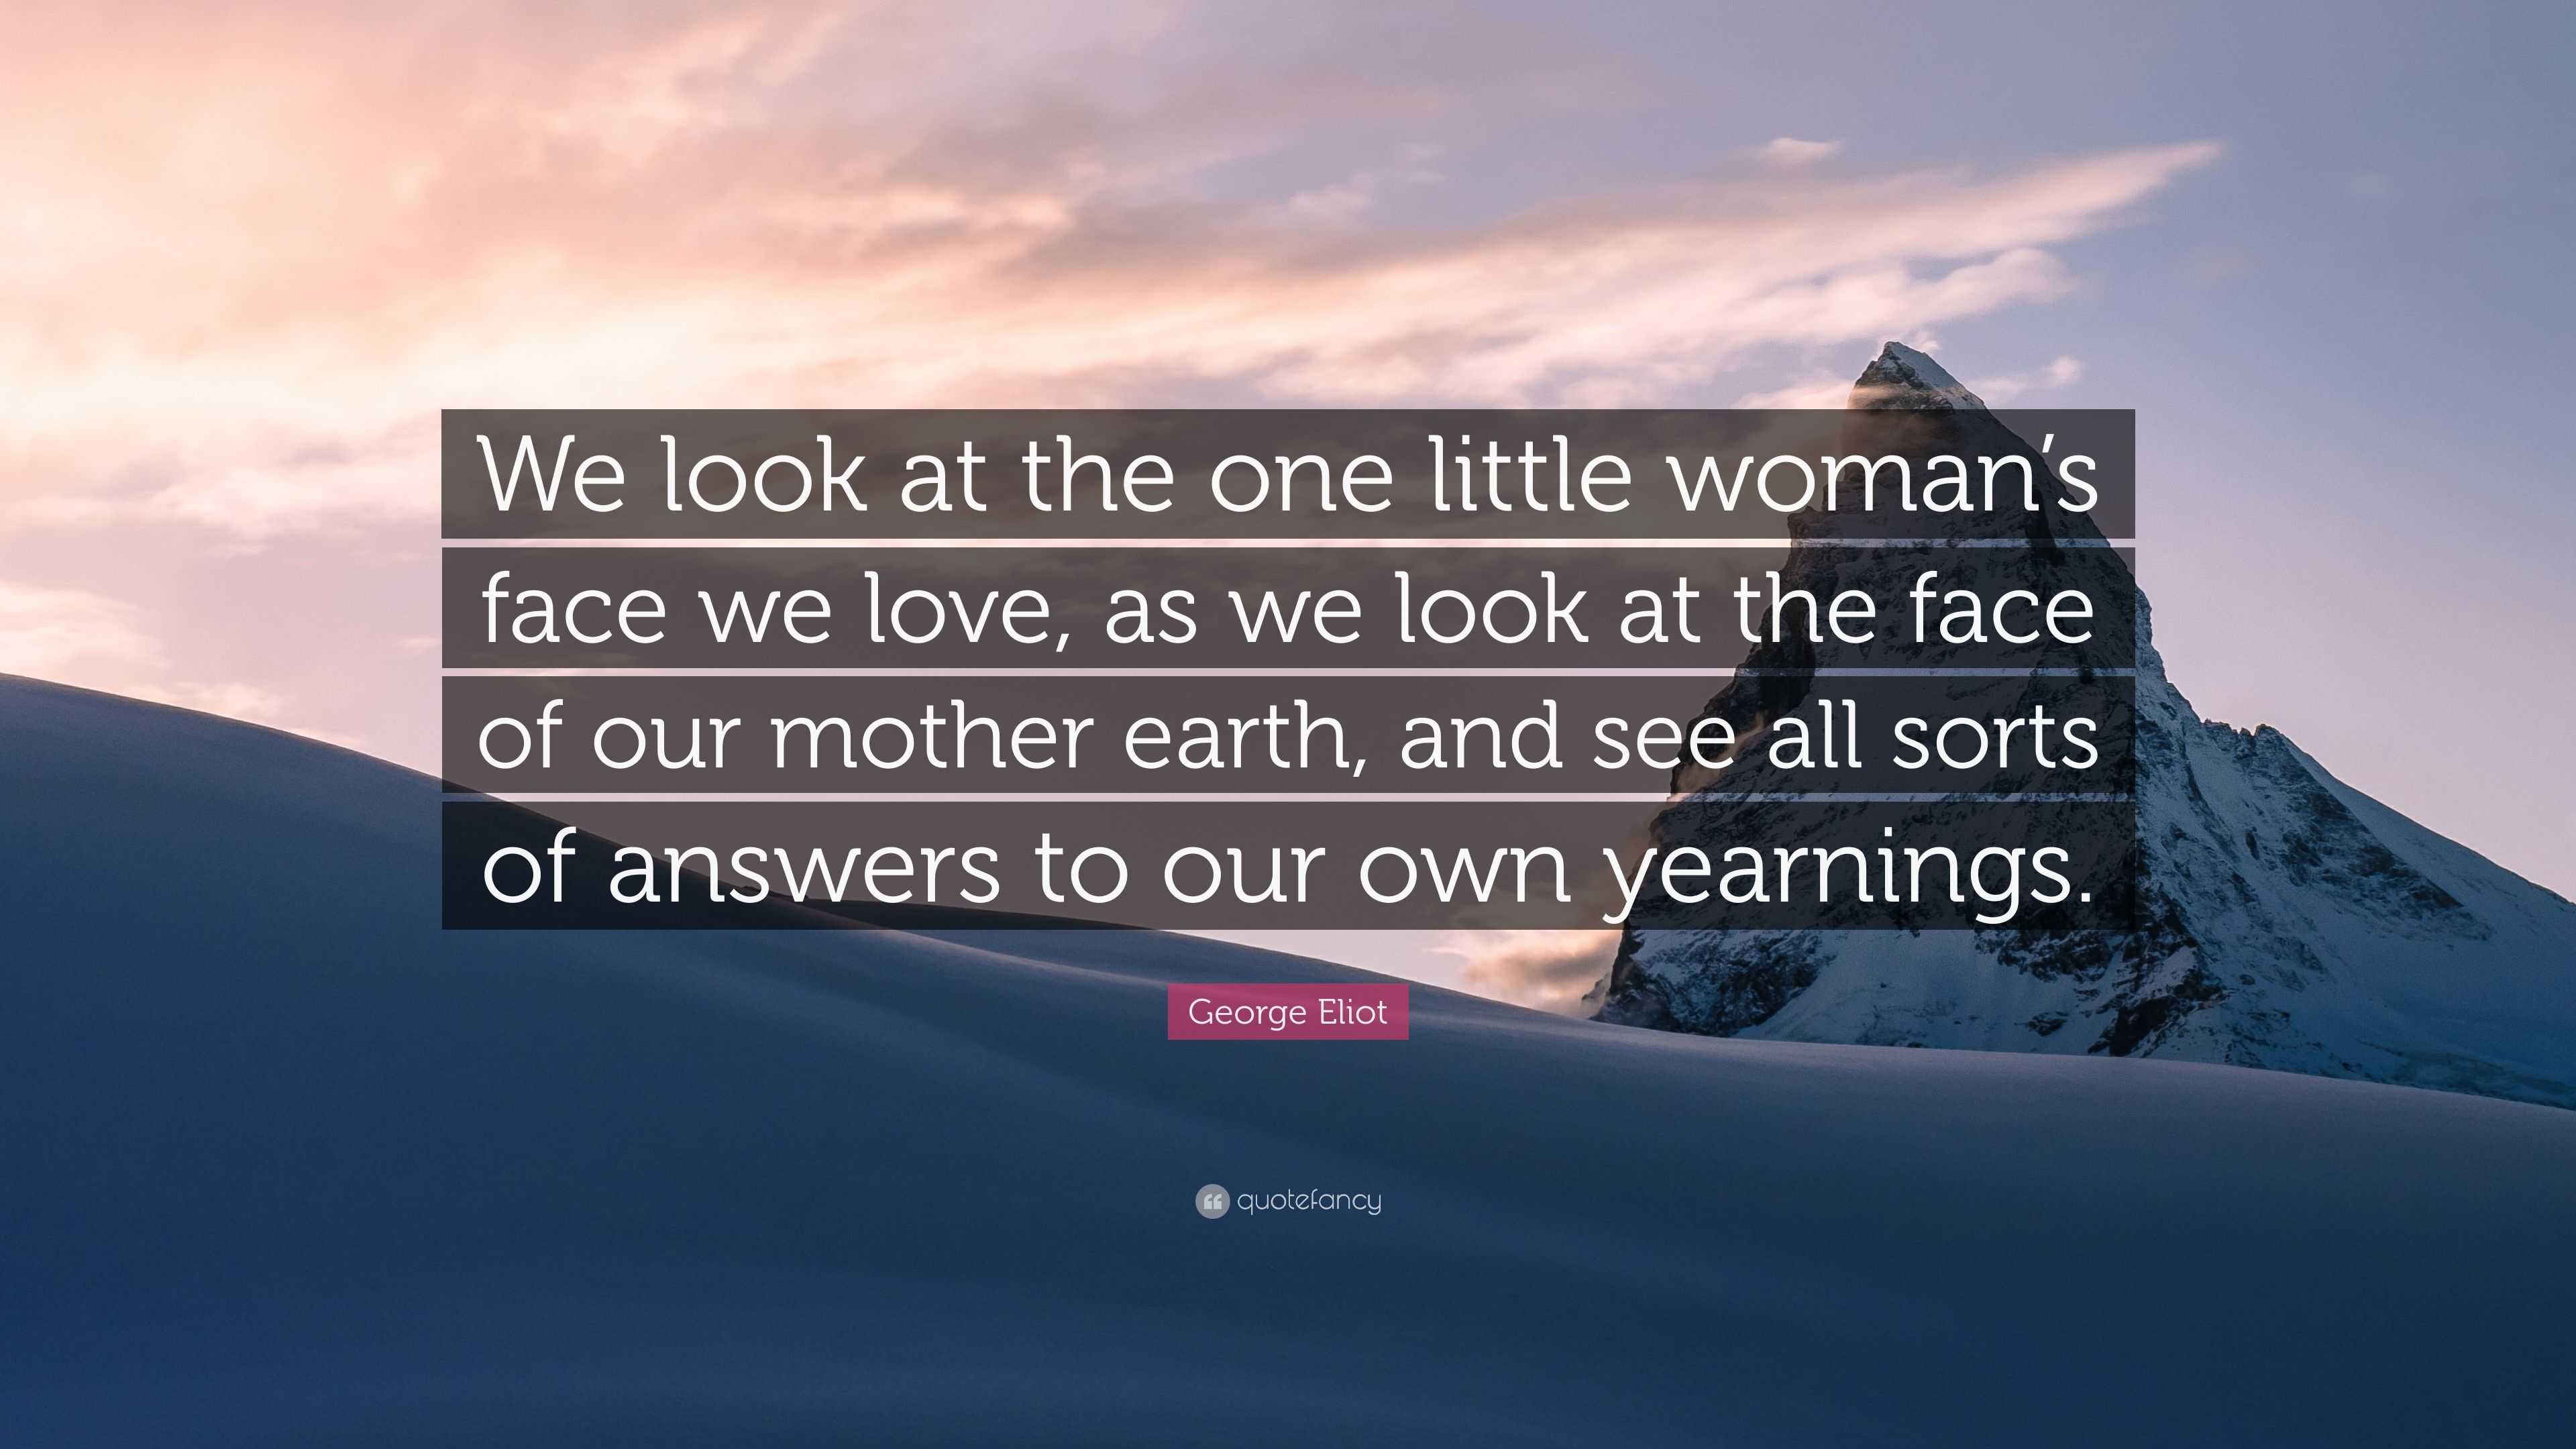 George Eliot Quote “We look at the one little woman s face we love